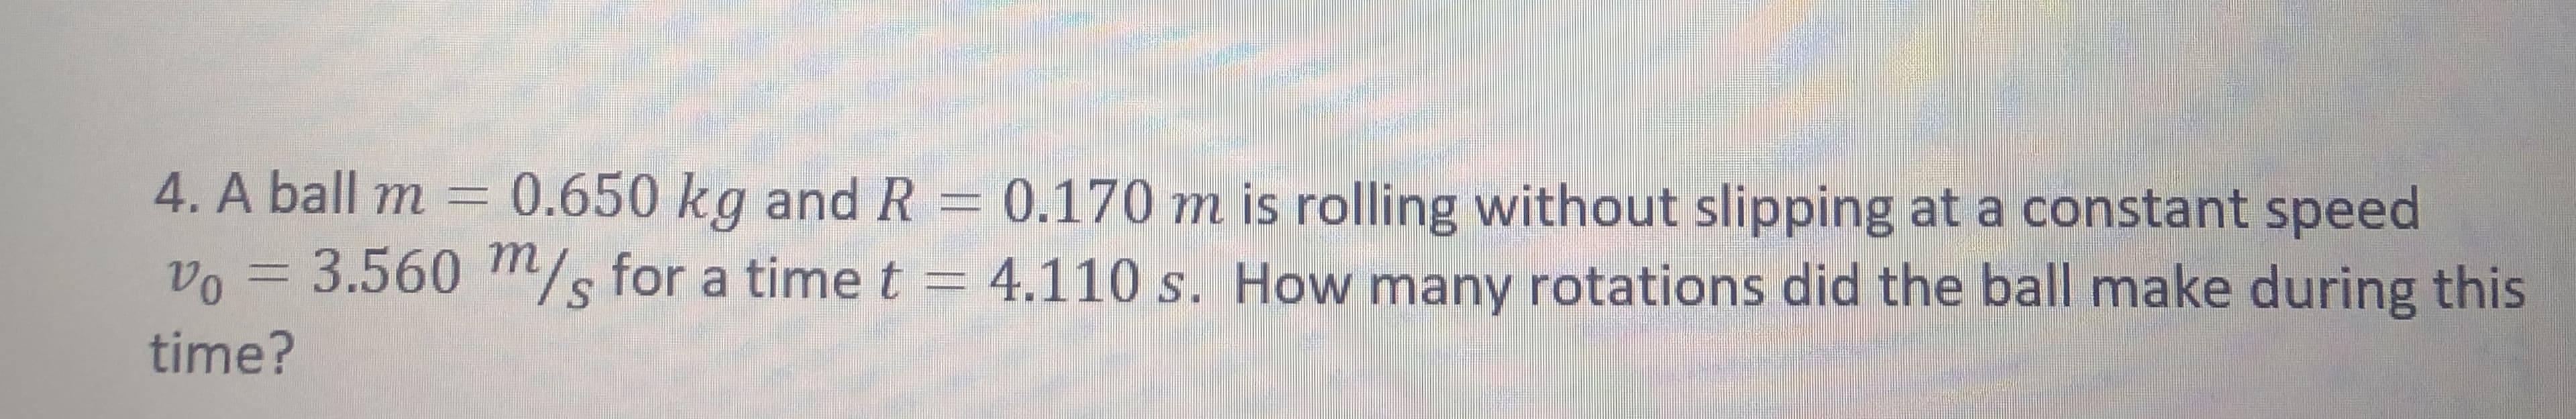 4. A ball m = 0.650 kg and R = 0.170 m is rolling without slipping at a constant speed
vo = 3.560 Tm/s for a timet = 4.110 s. How many rotations did the ball make during this
S.
time?
